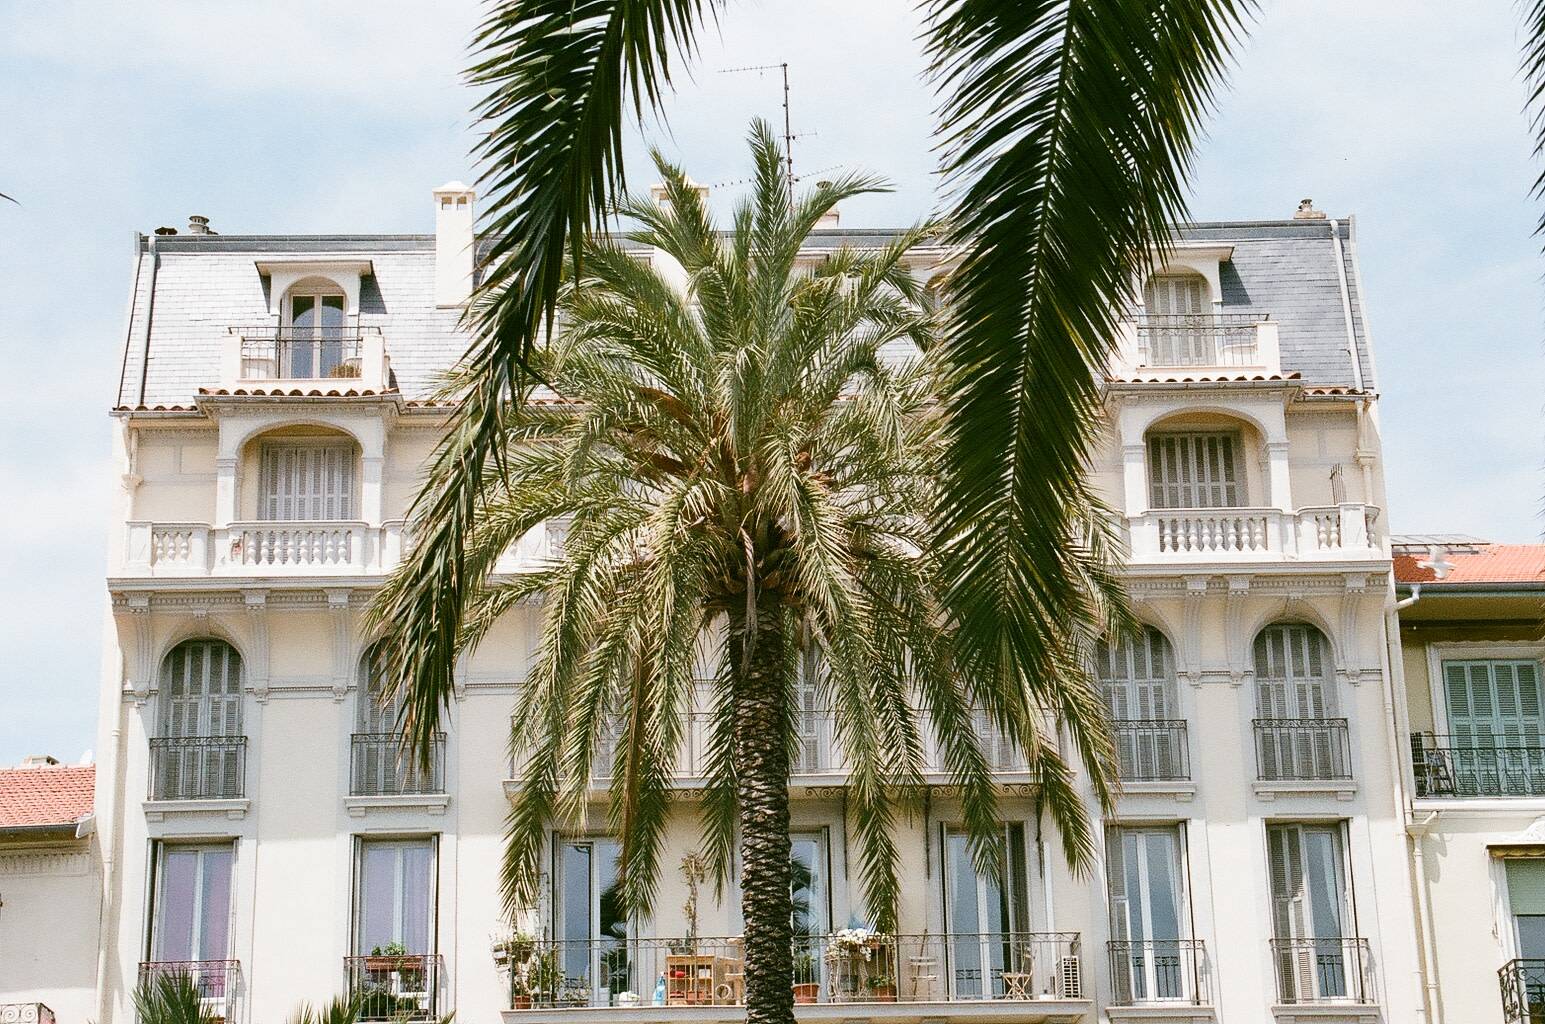 facade of a building with high glass windows and French balconies behind a palm tree that is right in the middle